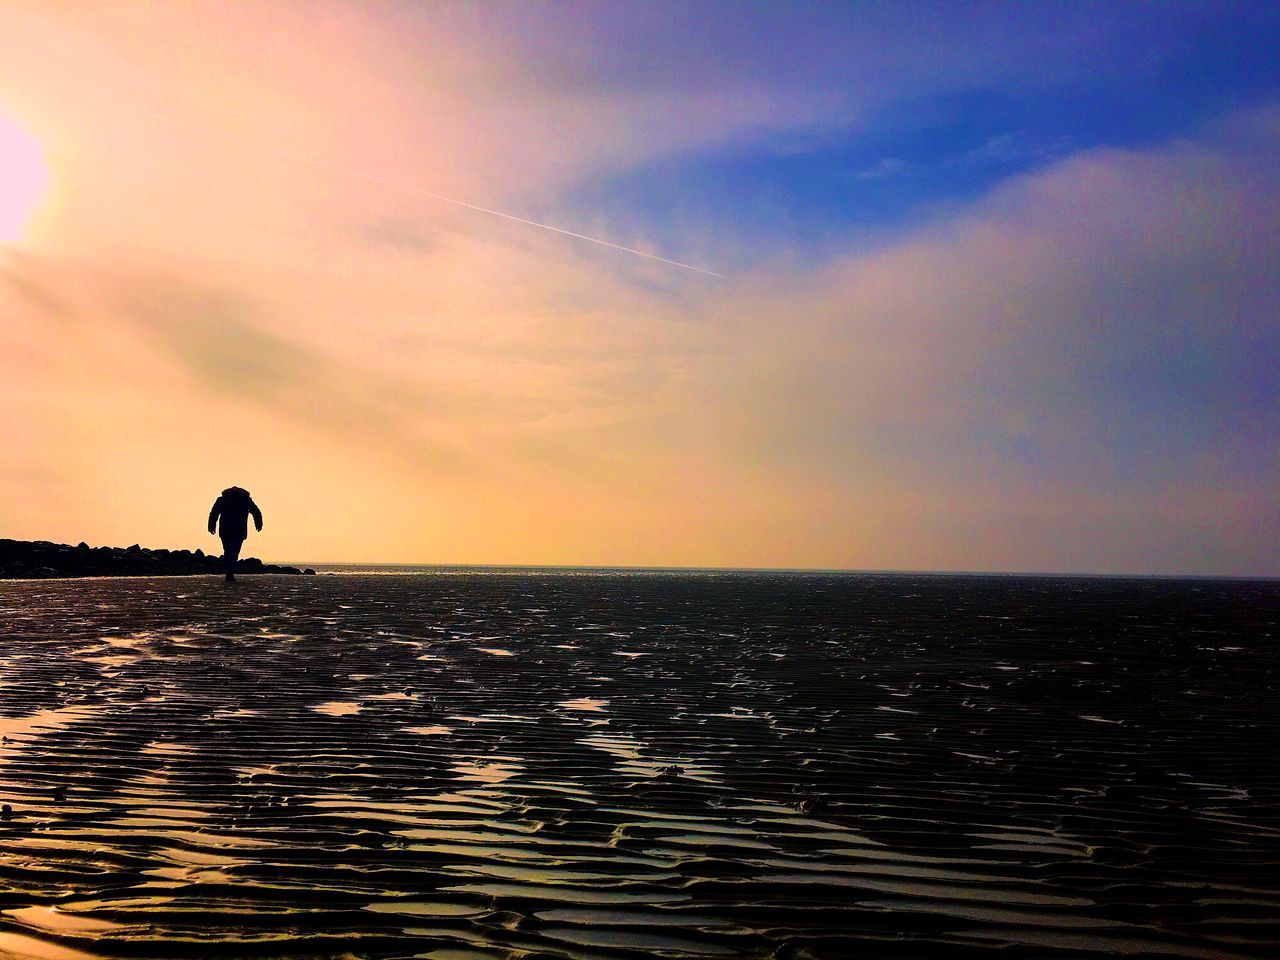 SILHOUETTE MAN ON BEACH AGAINST SKY DURING SUNSET